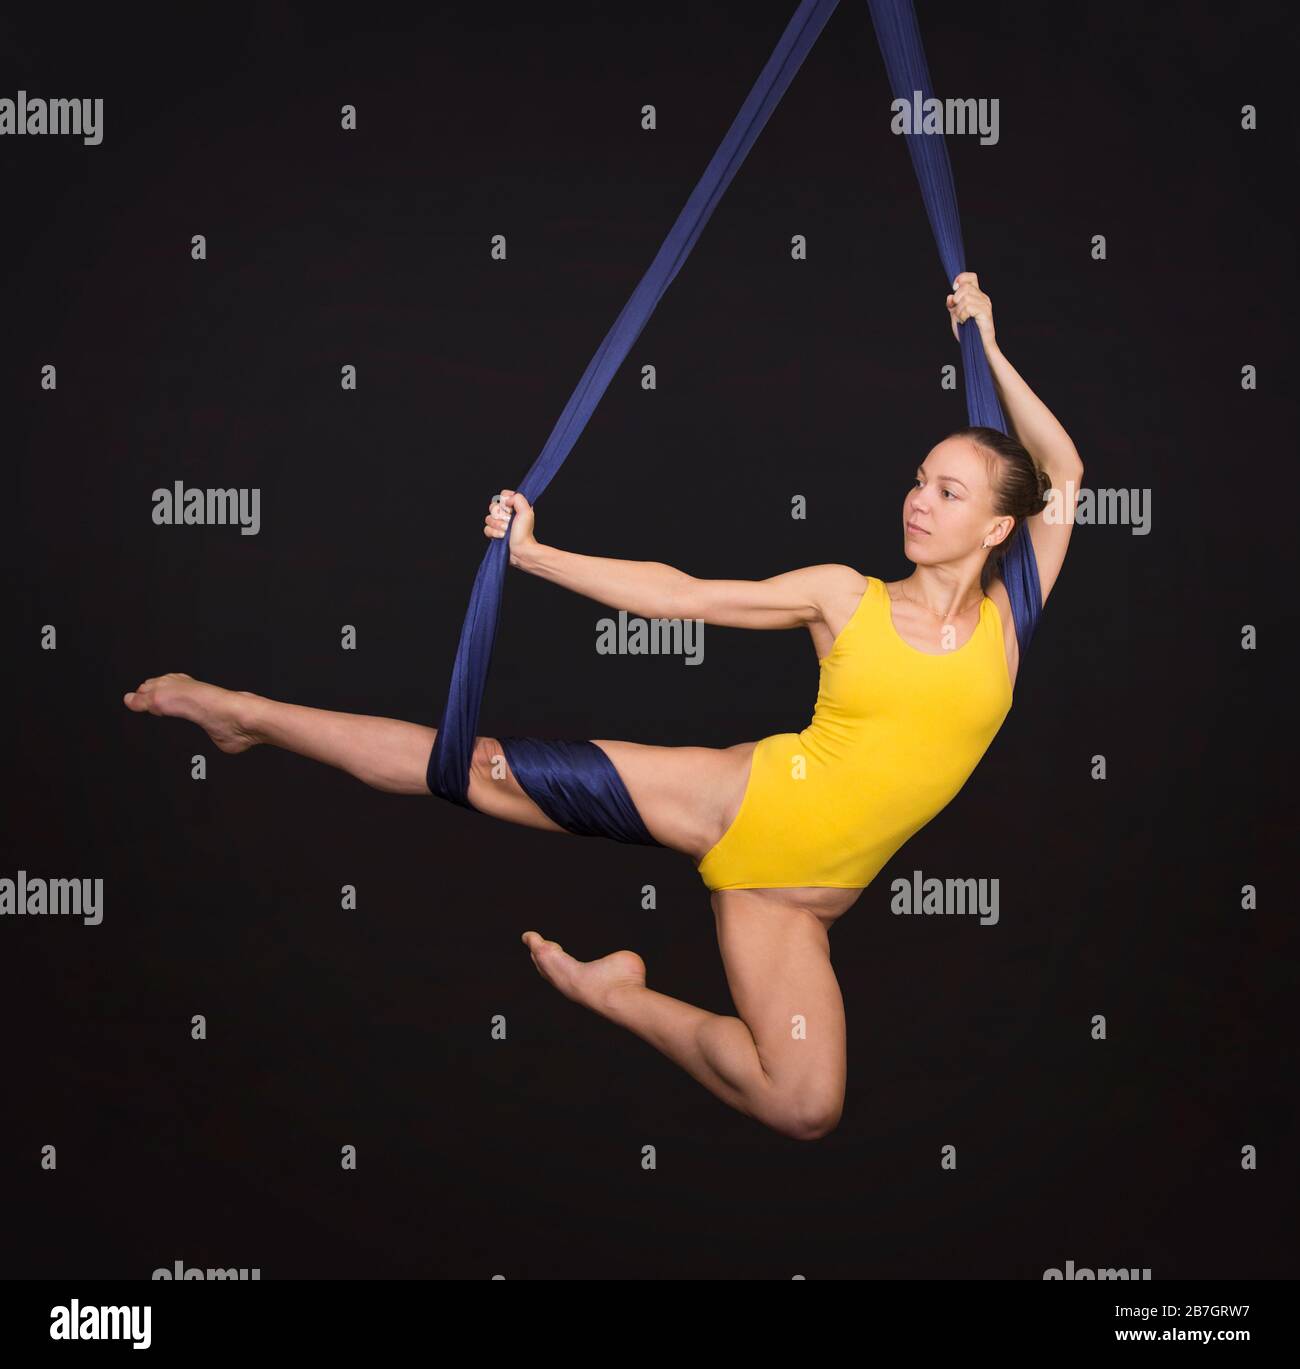 Young, smiling woman doing exercises on aerial silk. Studio shooting on a dark background. Stock Photo